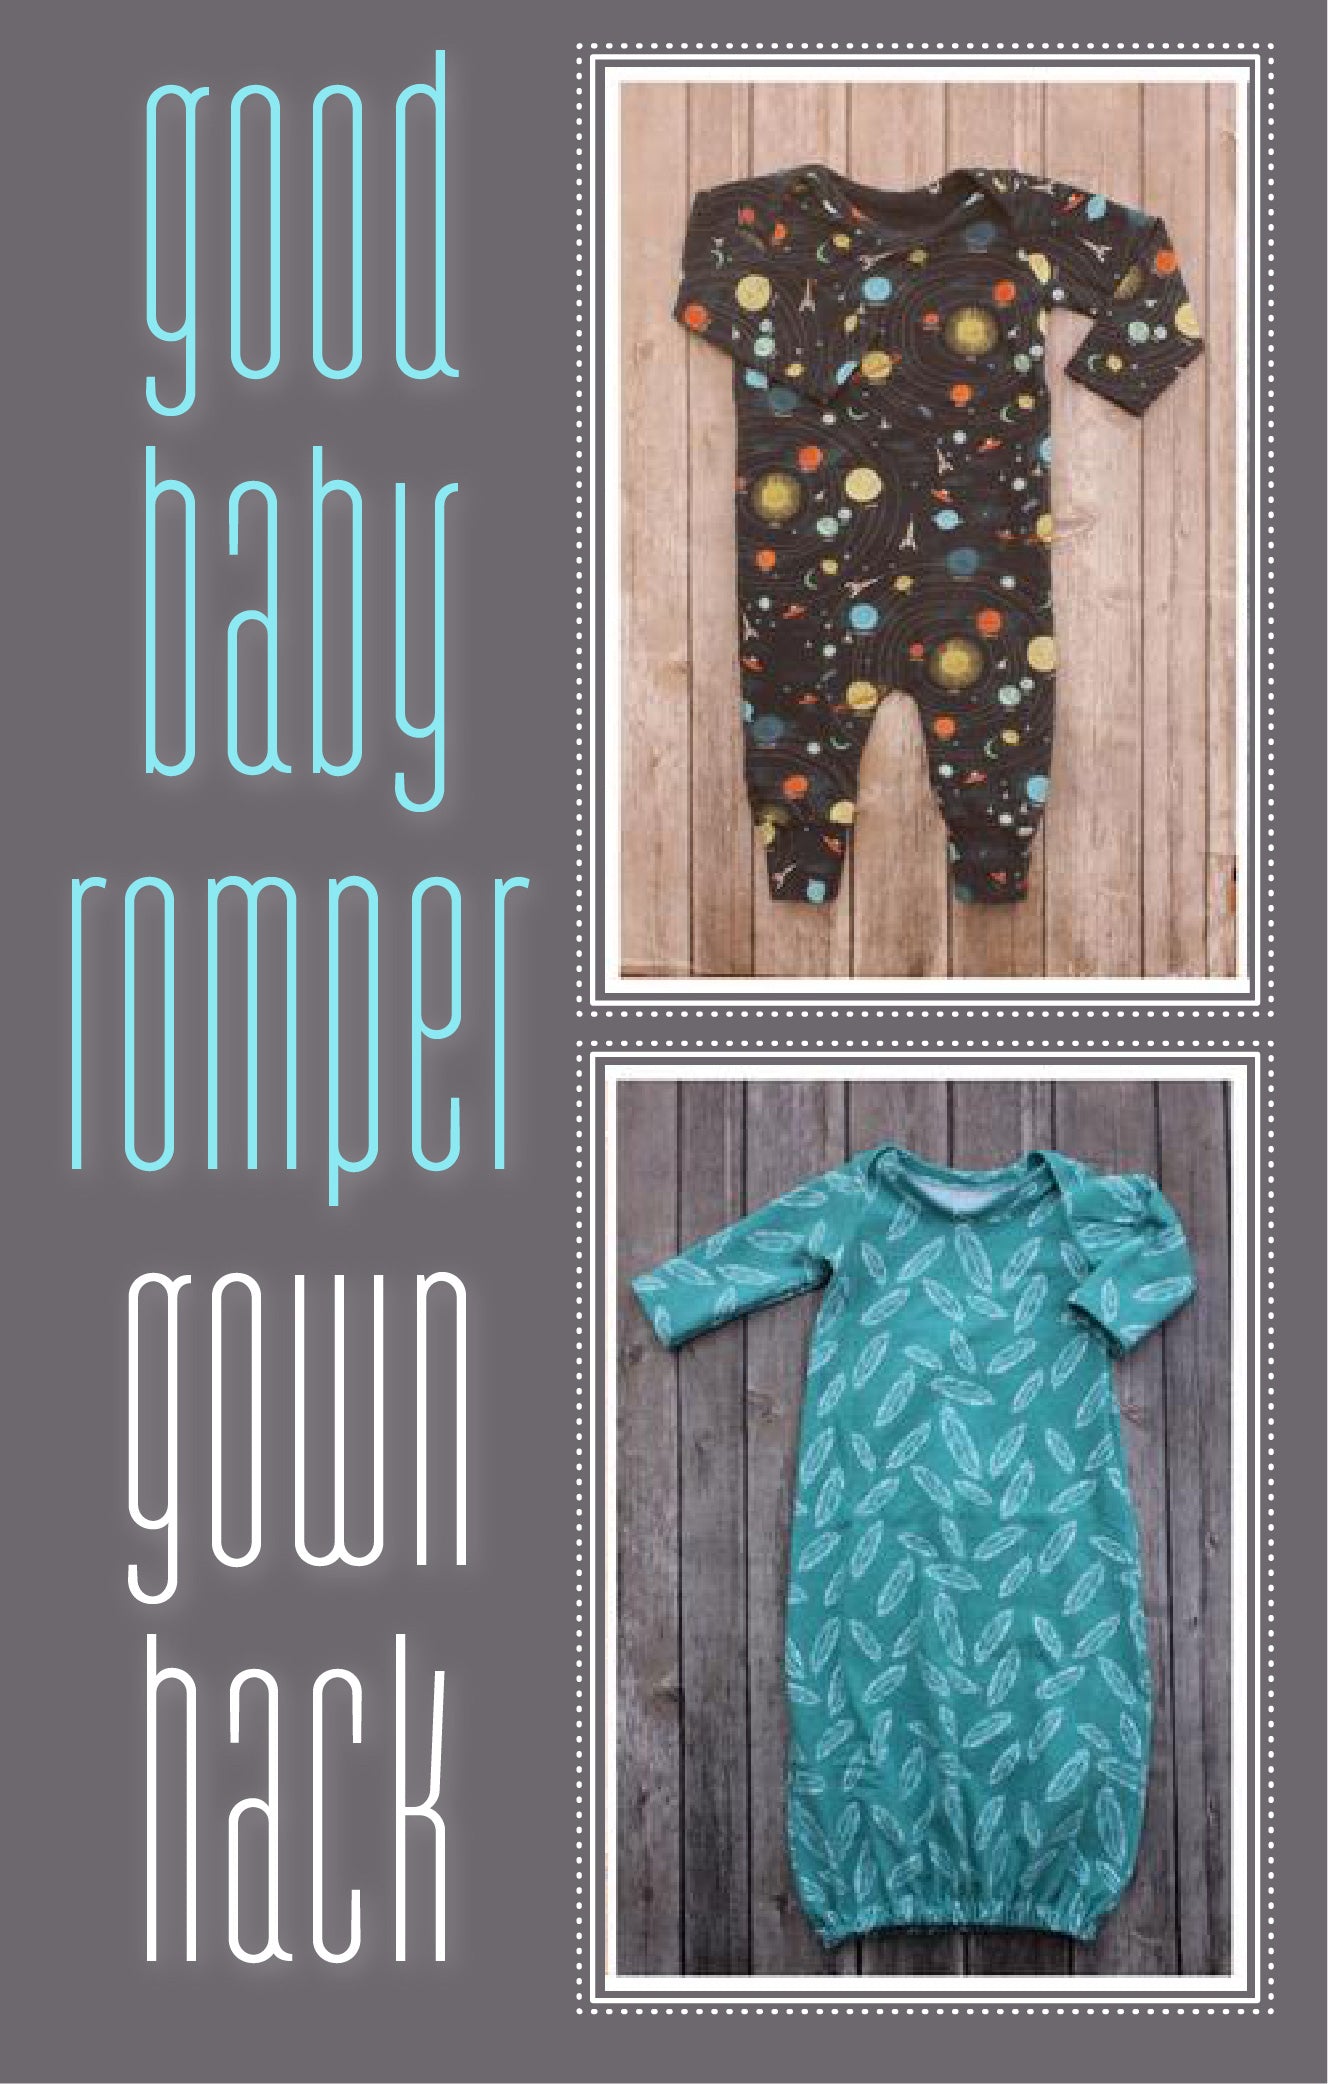 Hack the Good Baby Romper to a gown